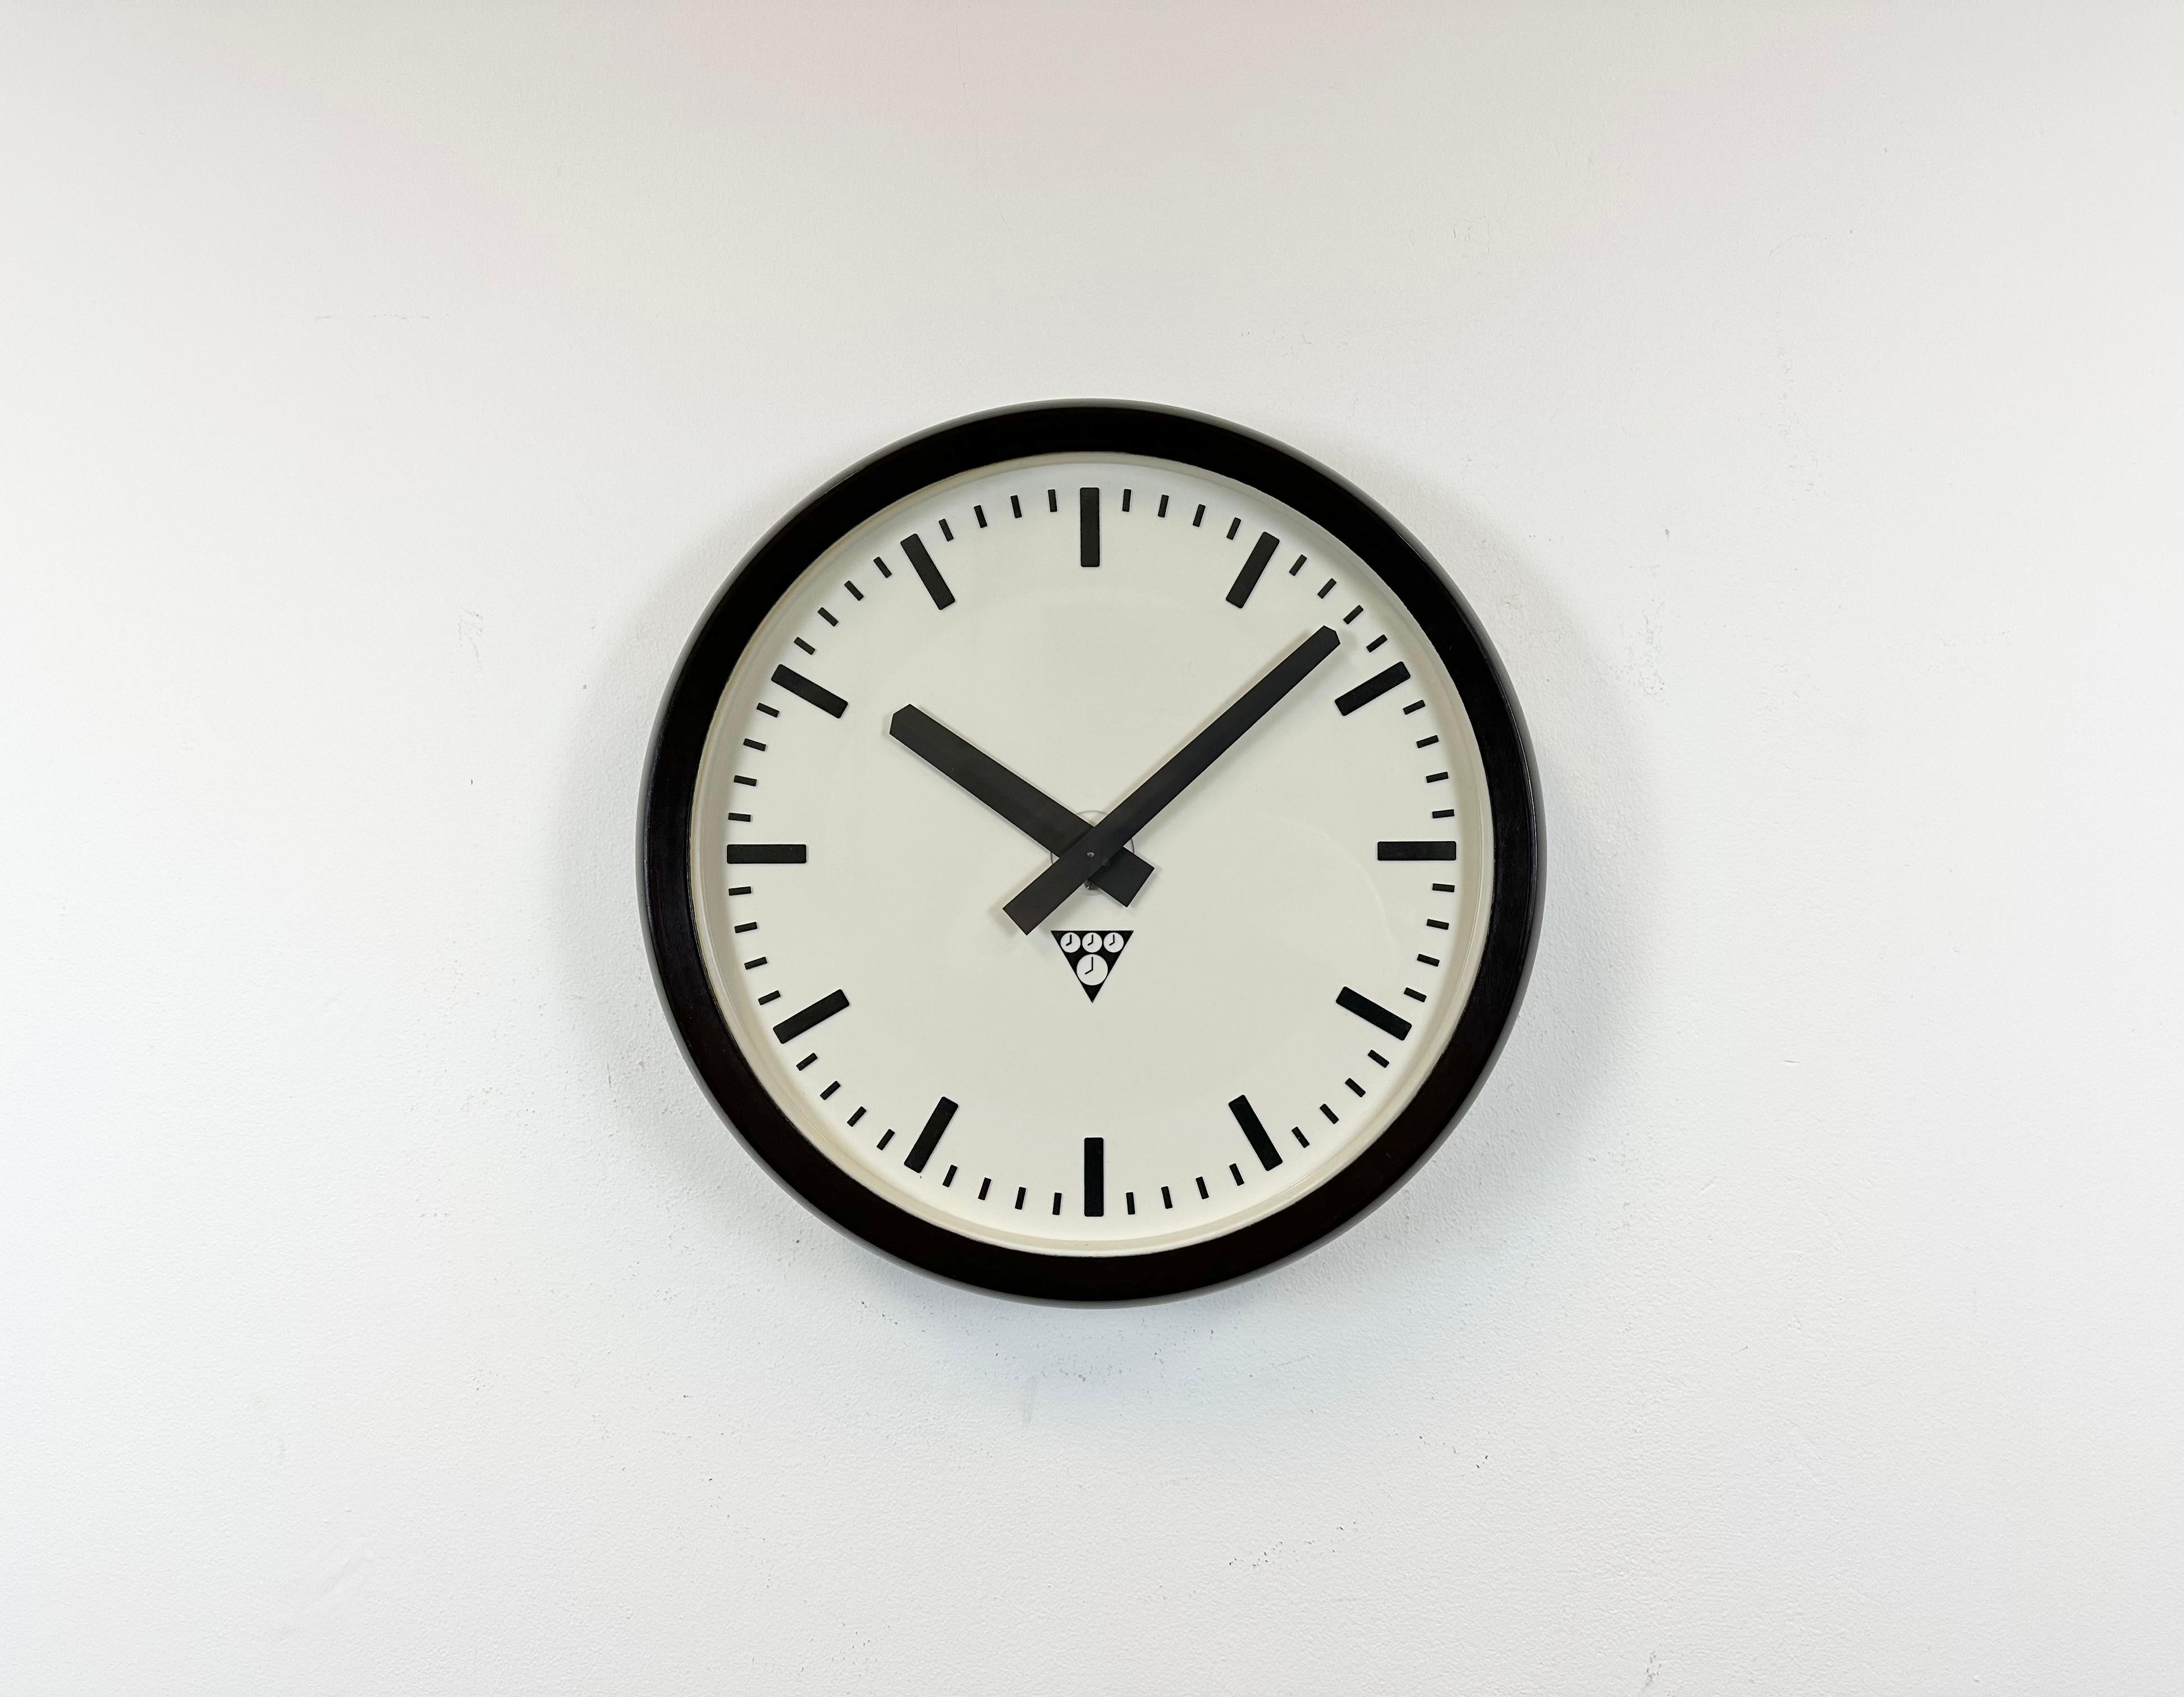 This wall clock was produced by Pragotron in former Czechoslovakia during the 1970s. The piece features a brown bakelite frame, a white bakelite dial, an aluminum hands and a clear glass cover. The piece has been converted into a battery-powered